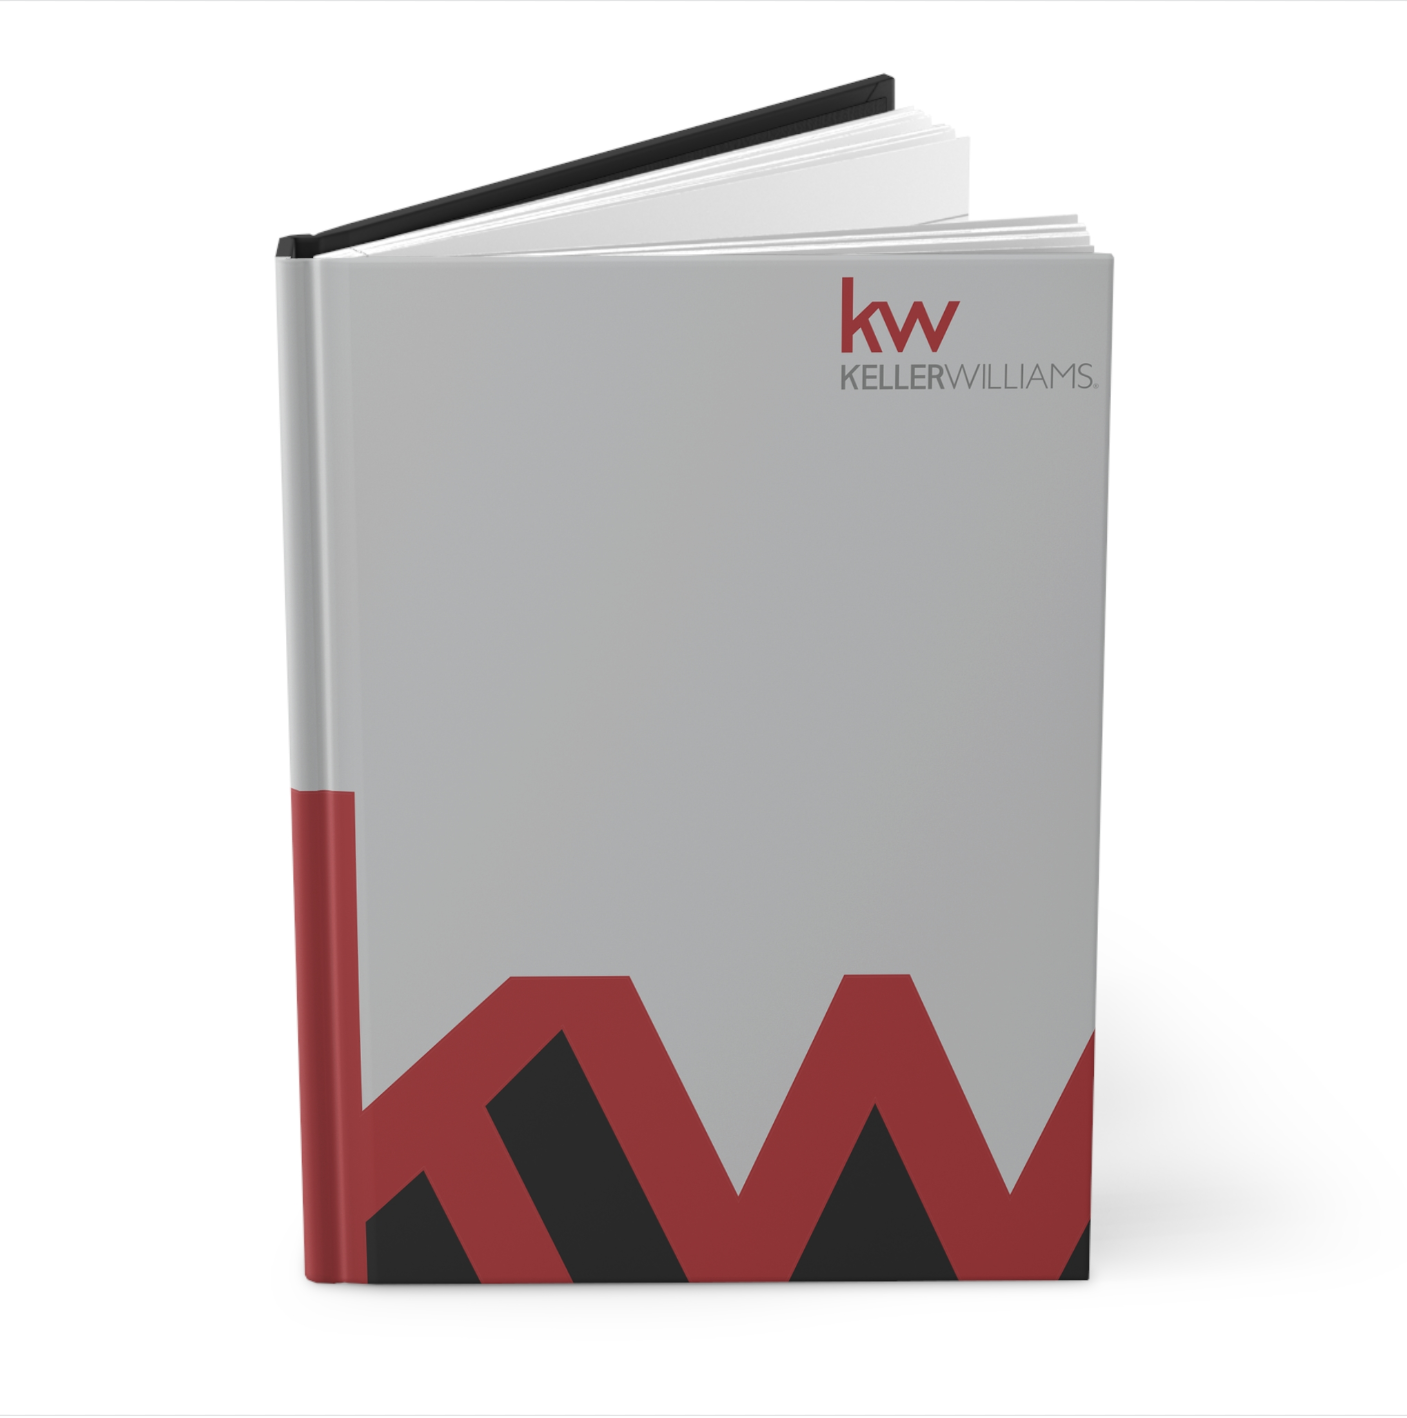 KW Full Color Hardcover Binders White KW Monogram (from as low as $10.46 per cover)